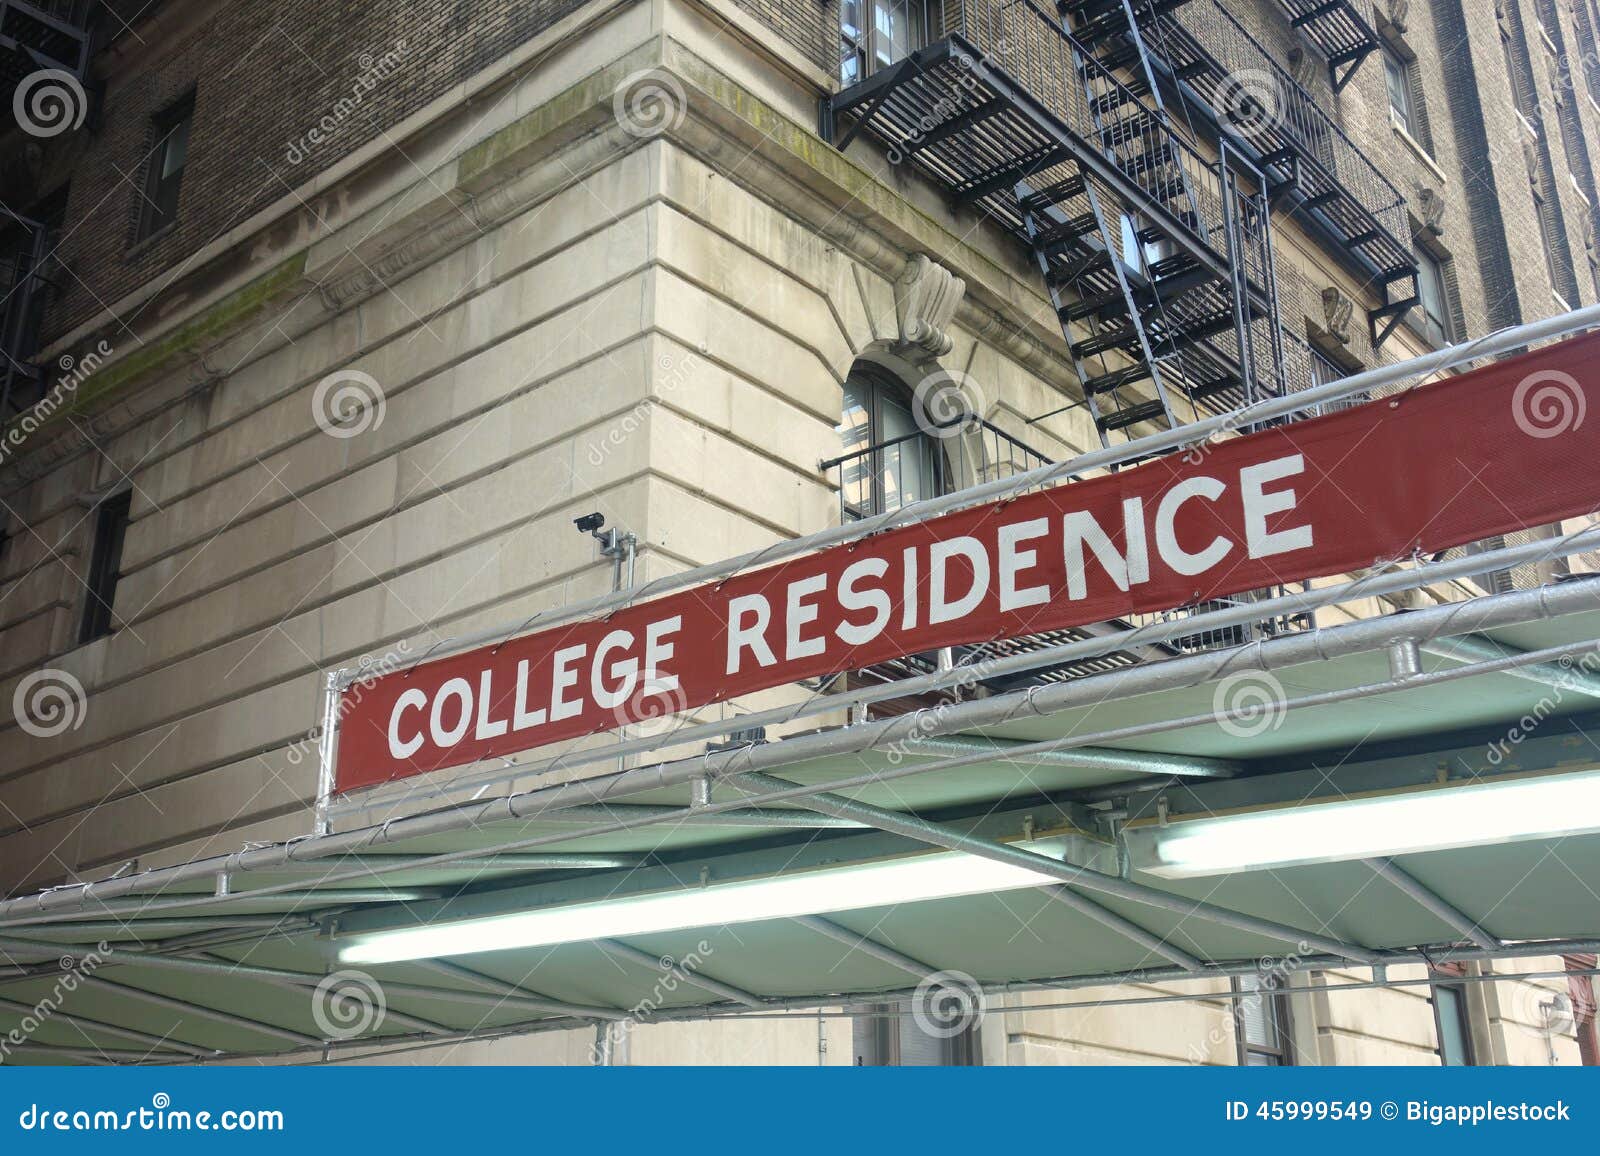 college residence